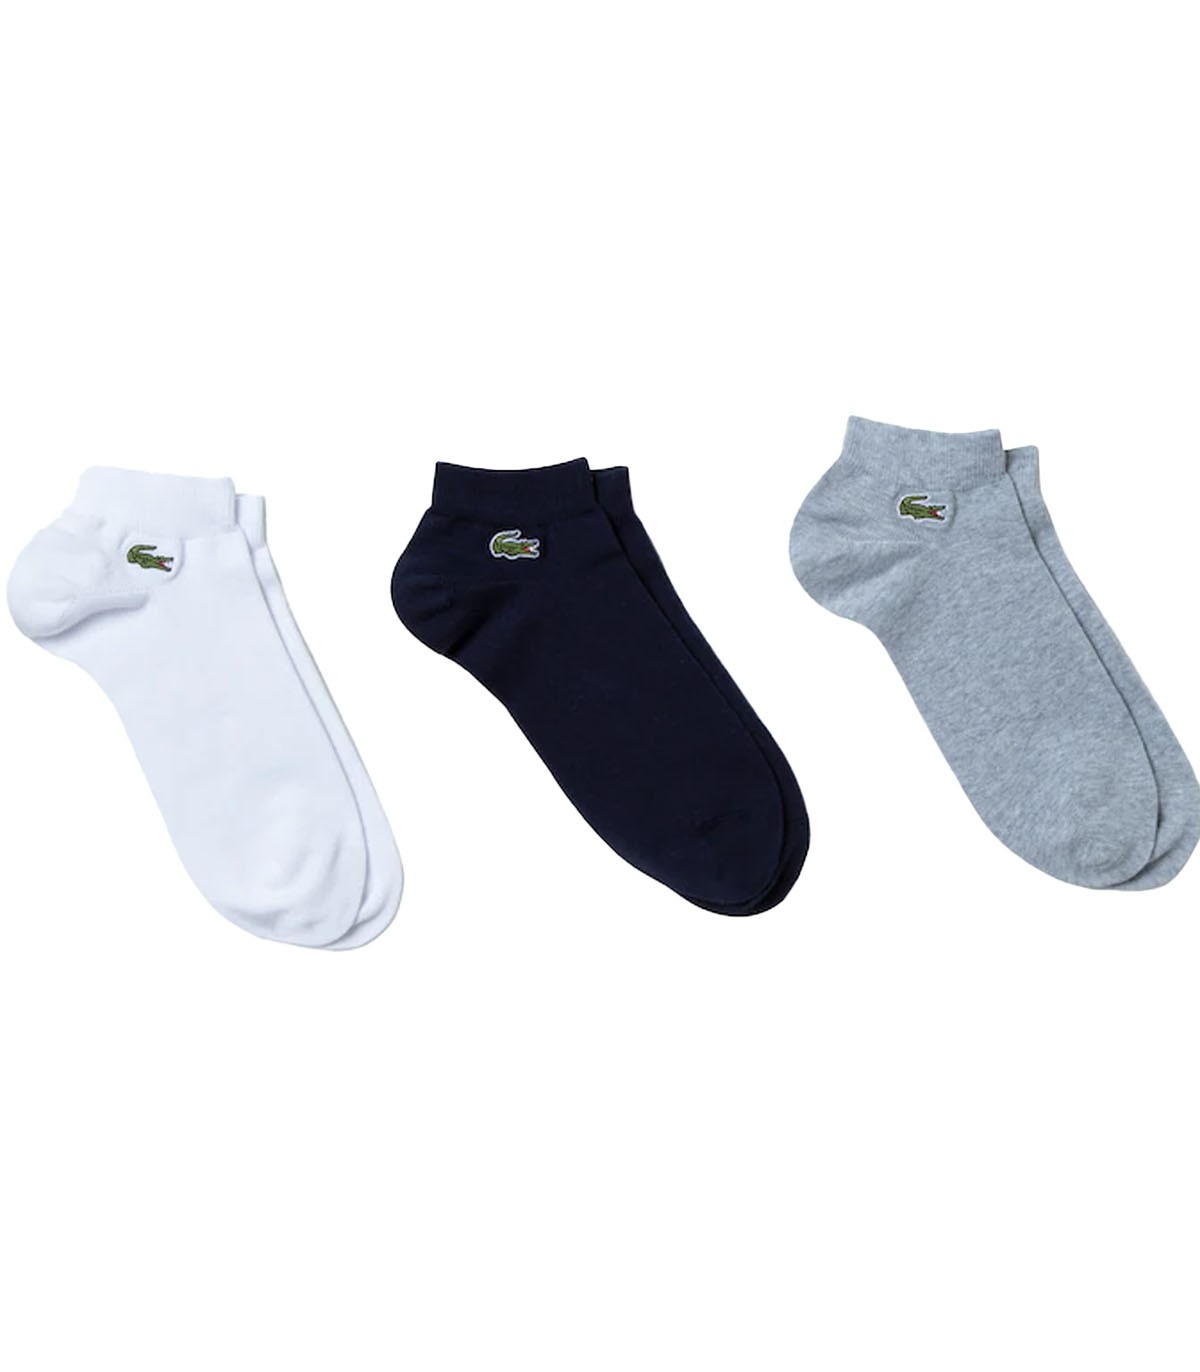 Lacoste - Pack Tres Calcetines - Multicolor